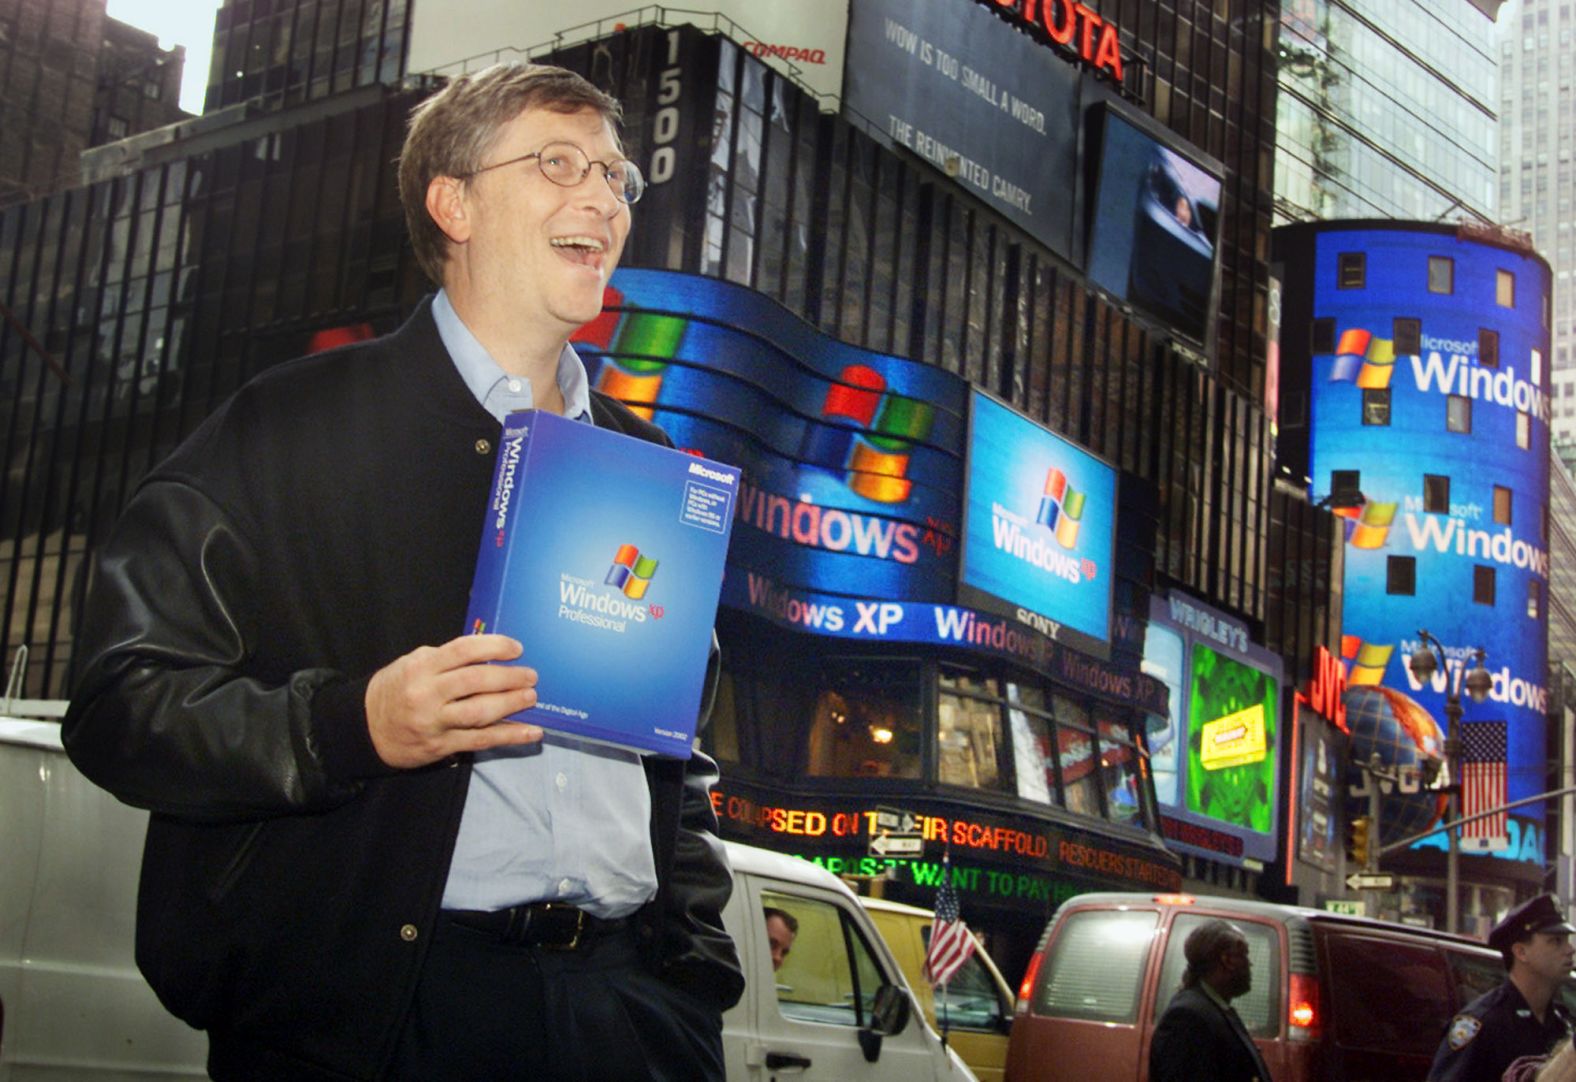 Gates stands in New York's Times Square to promote the new Windows XP operating system in 2001.